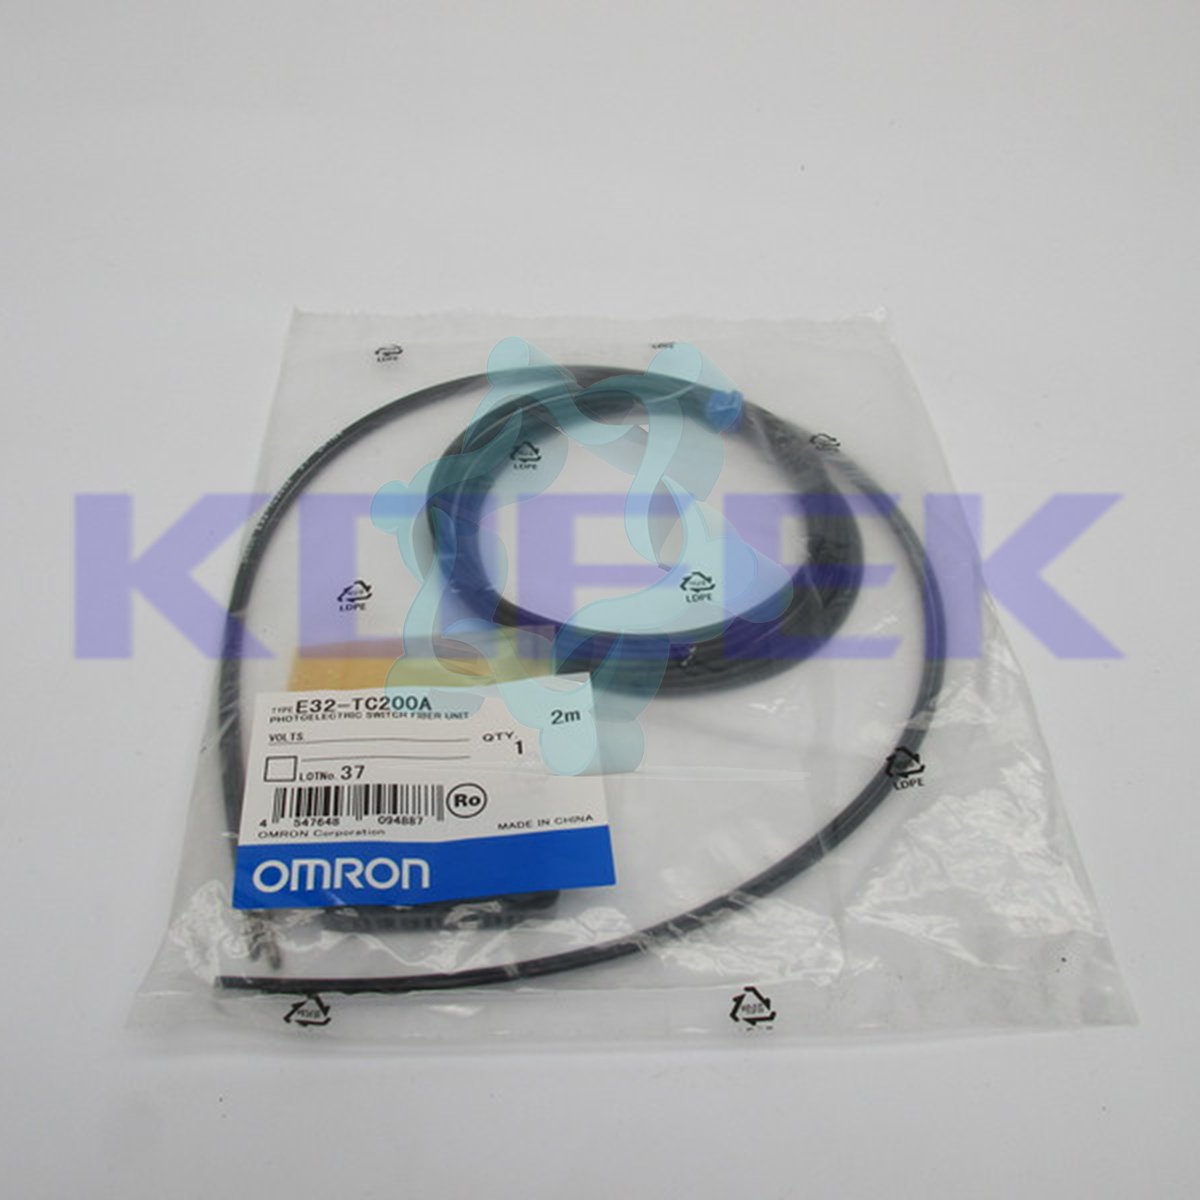 E32-TC200A KOEED 101-200, 80%, import_2020_10_10_031751, Omron, Other